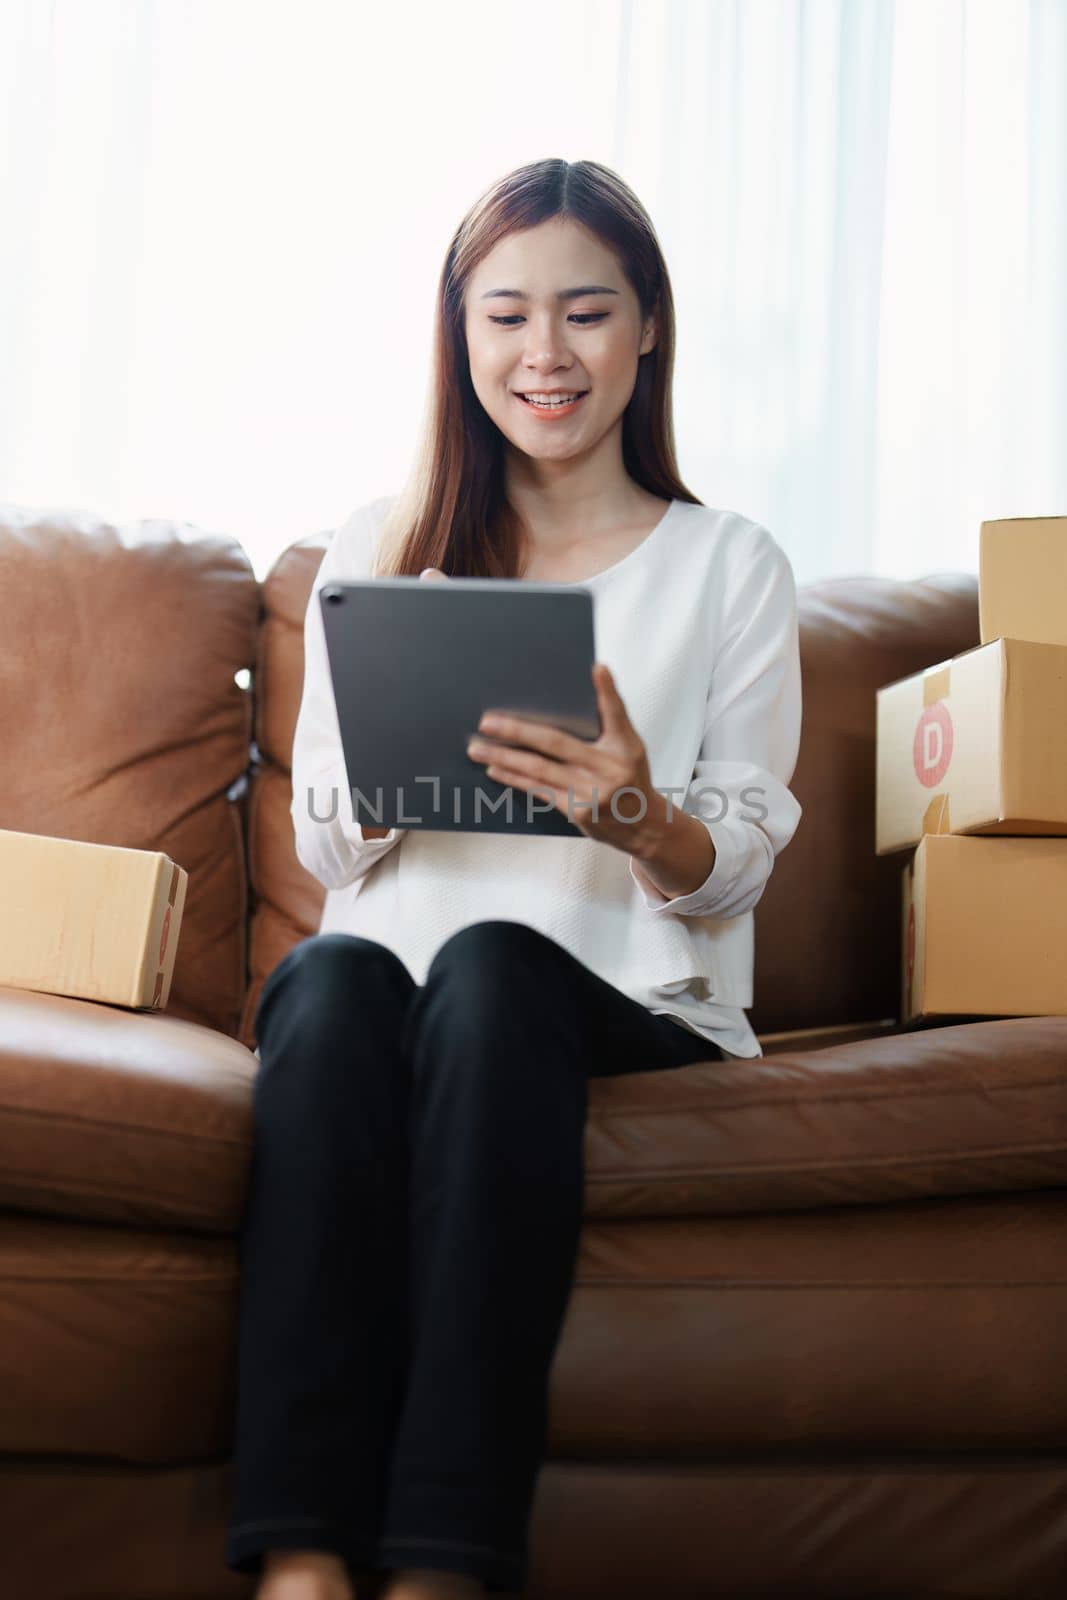 Starting small business entrepreneur of independent young Asian woman online seller is using tablet computer and taking orders to pack products for delivery to customers. SME delivery concept by Manastrong